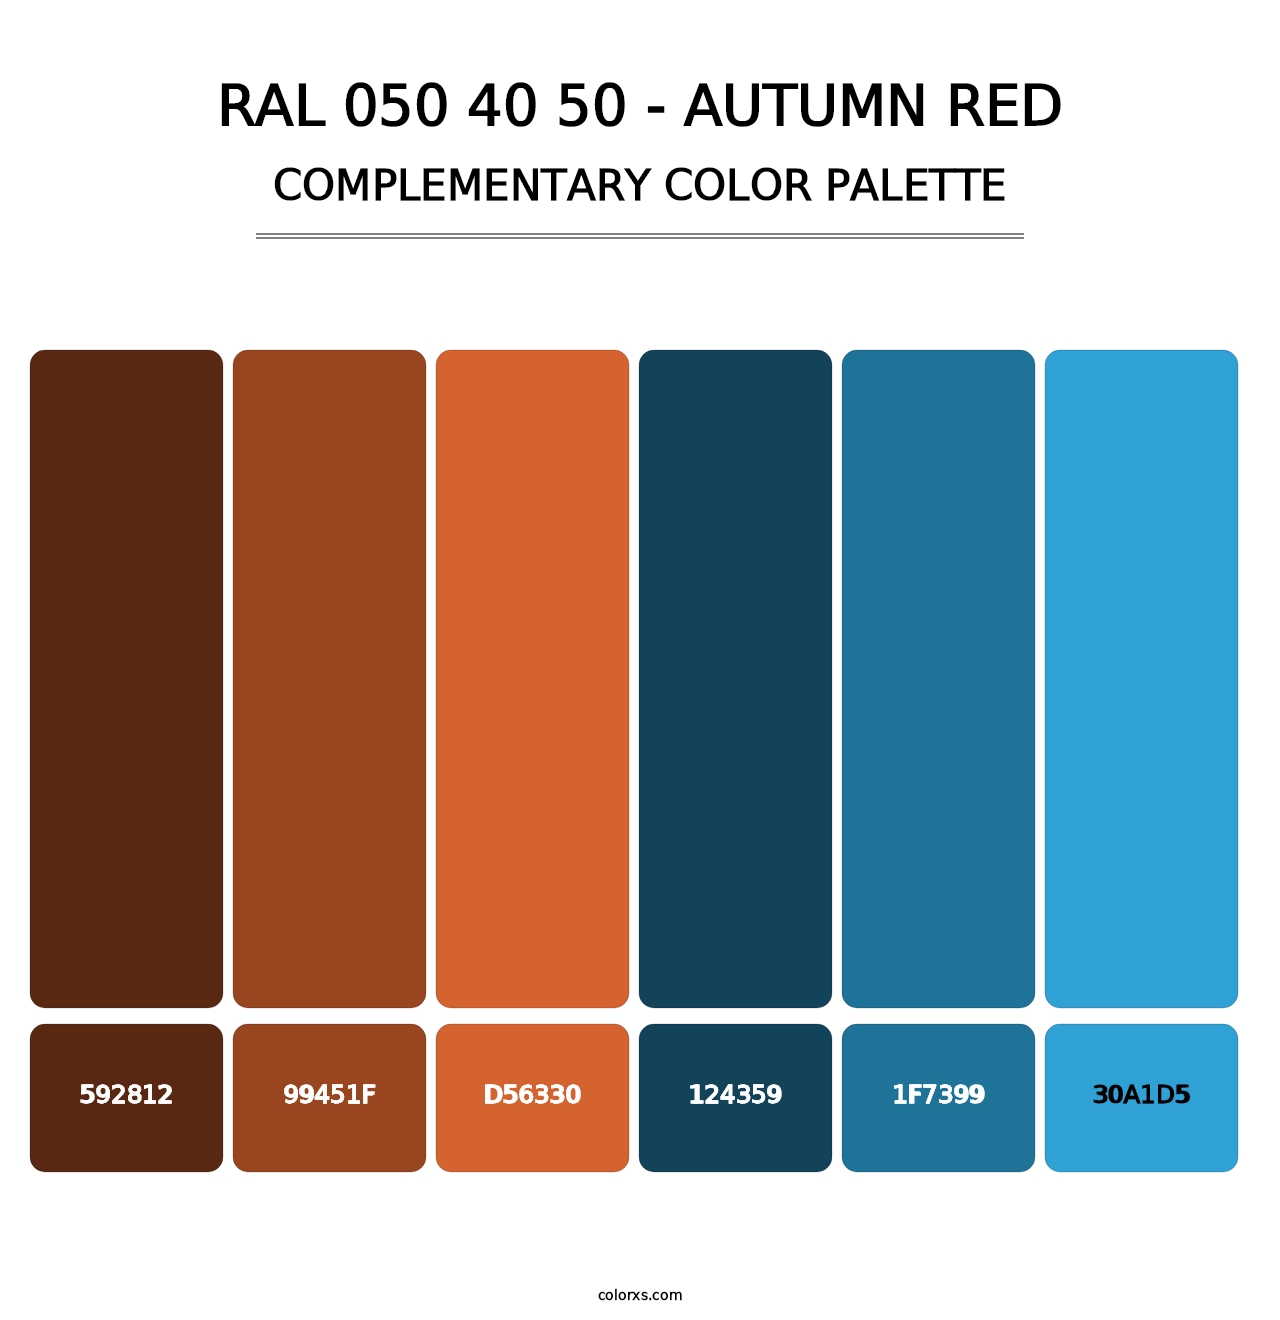 RAL 050 40 50 - Autumn Red - Complementary Color Palette